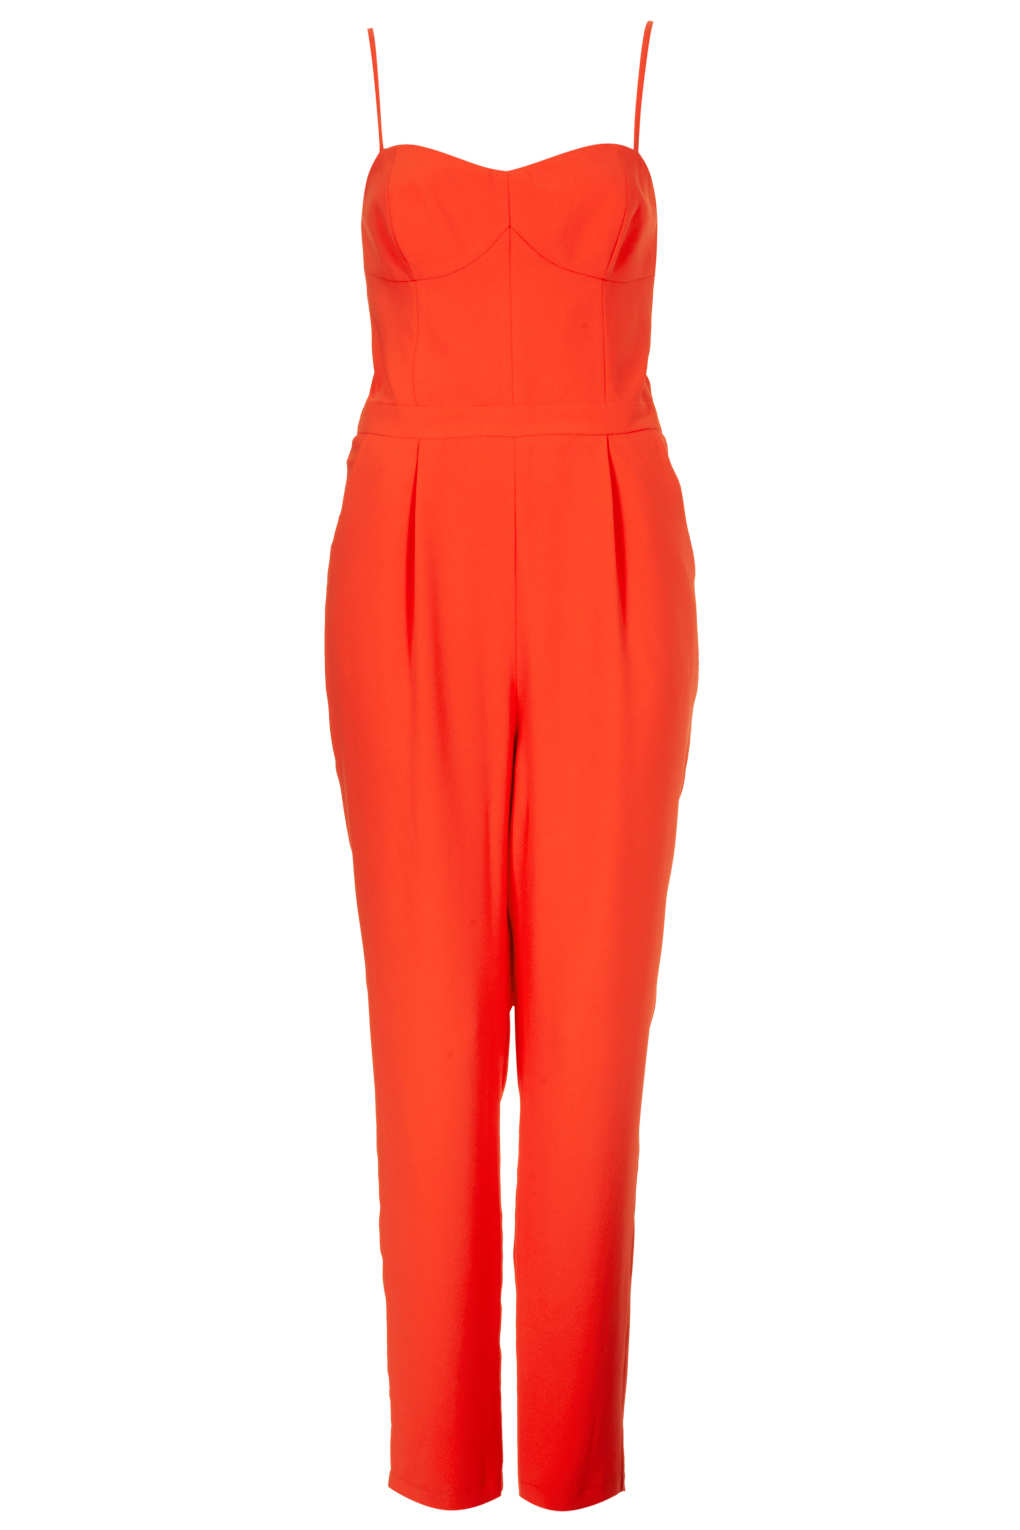 Lyst - Topshop Strappy Cup Jumpsuit in Orange